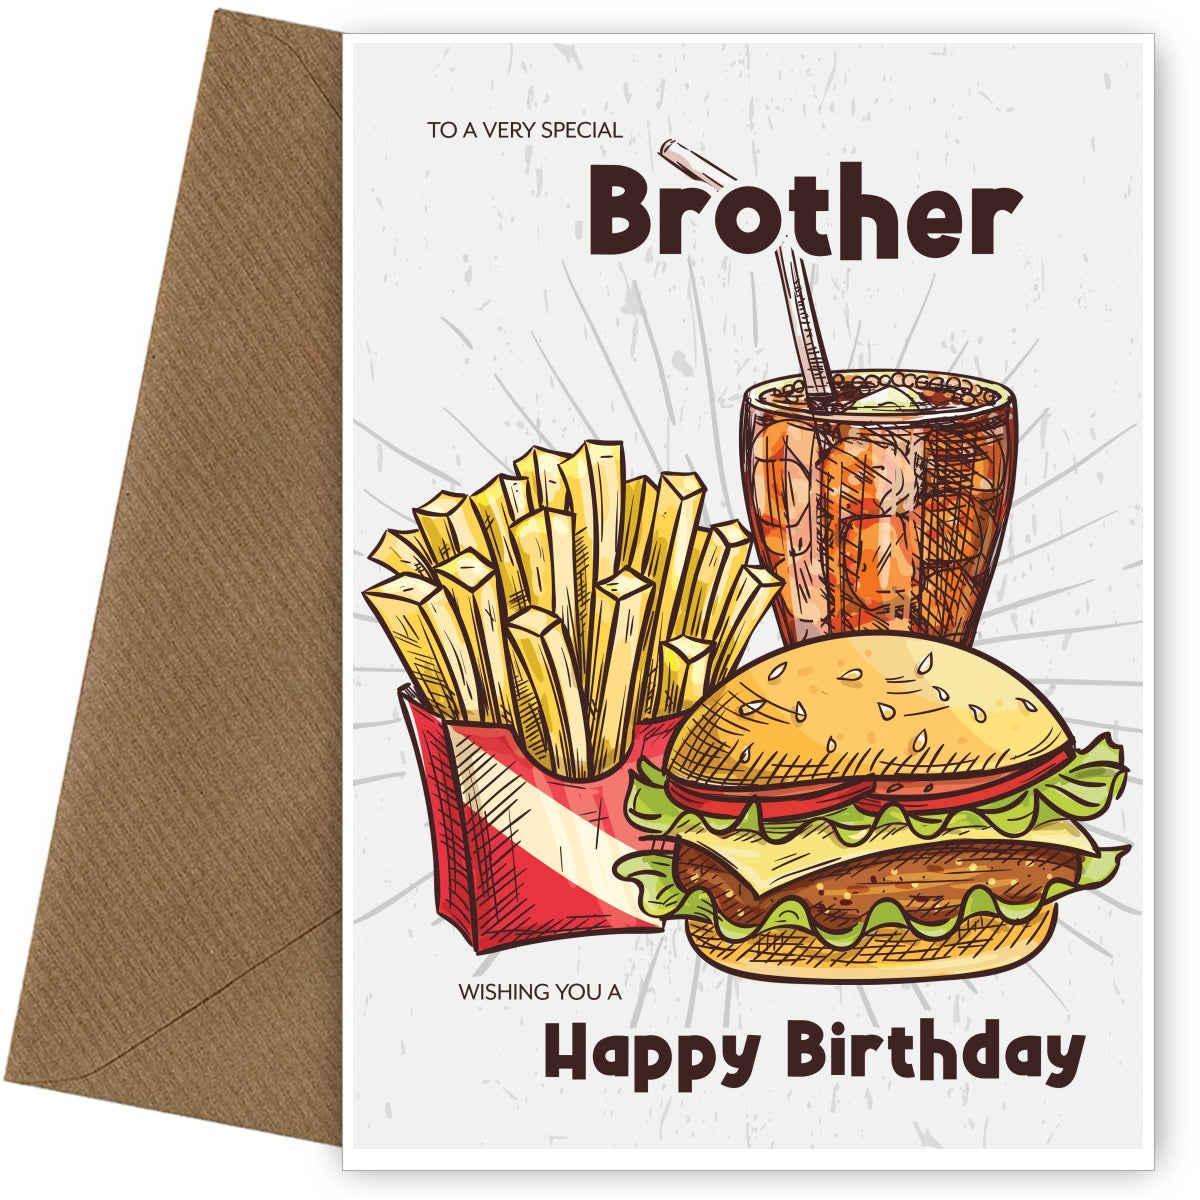 Brother Birthday Card for Child, Adult on his 10th 11th 12th 13th 15th 16th Birthday